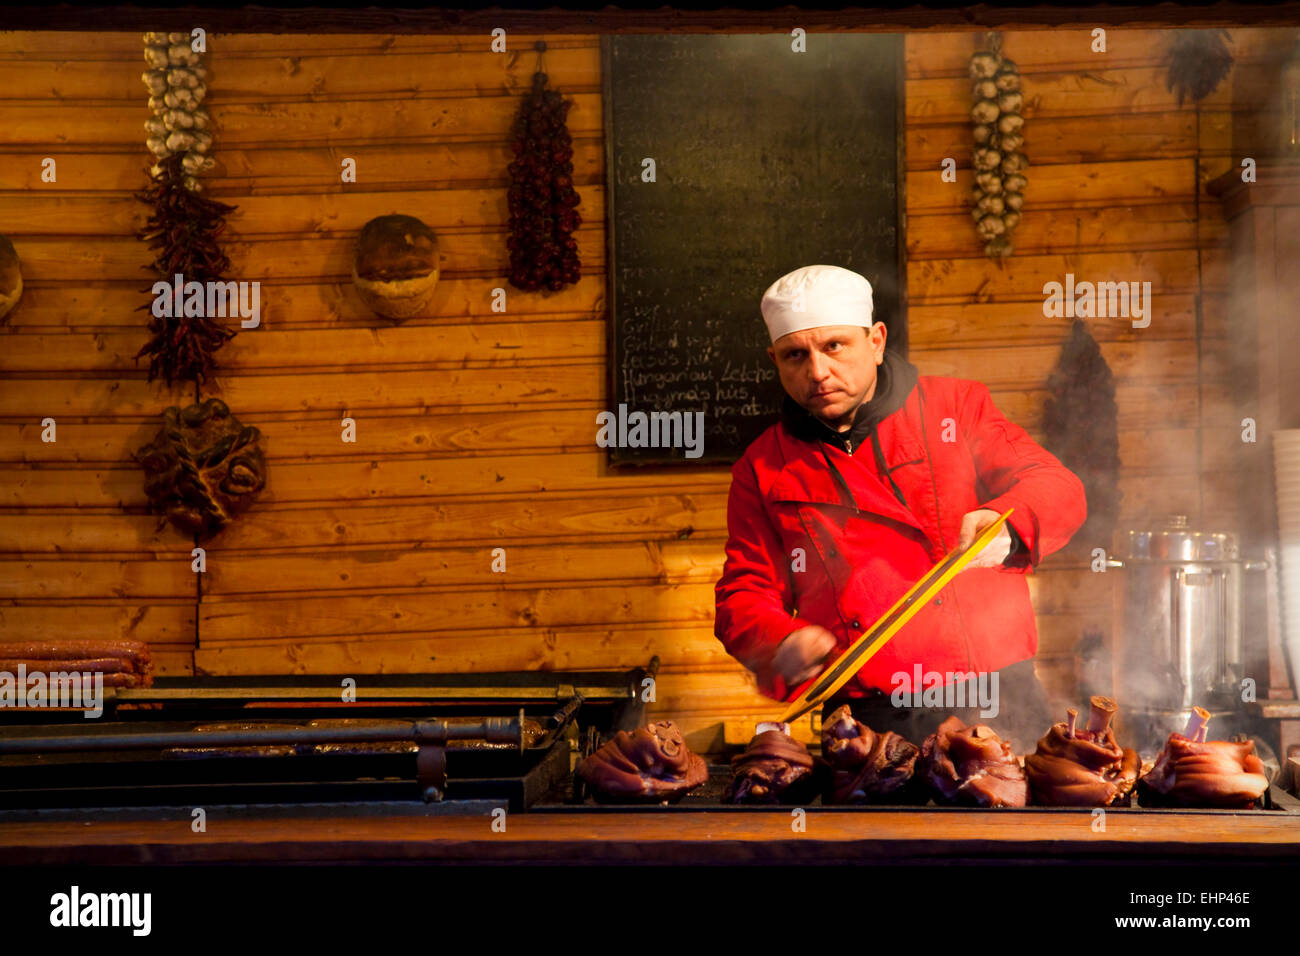 A chef cooks meat on a grill at a Christmas Market in Budapest, Hungary Stock Photo